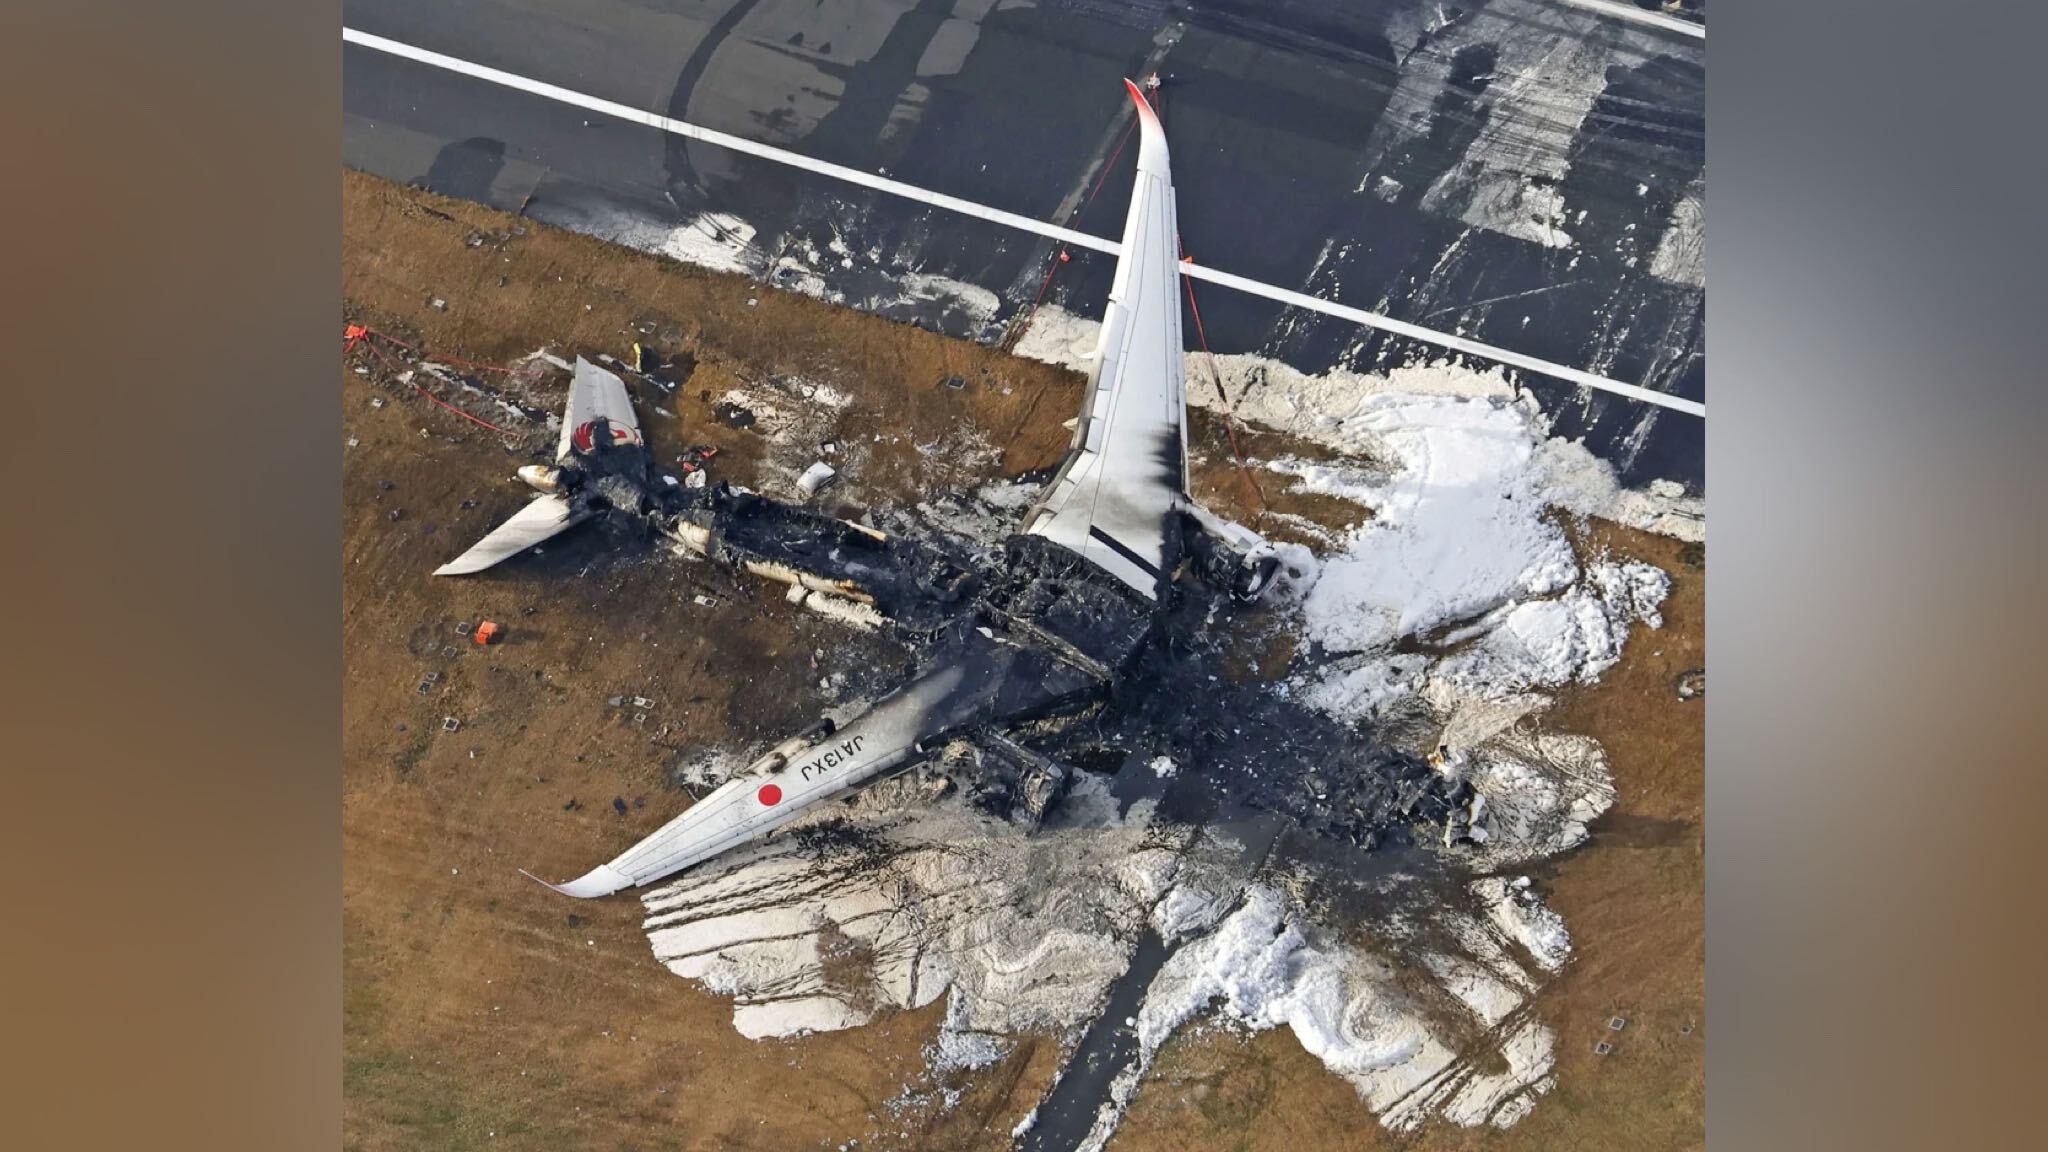 A Japan Airlines plane burns at Haneda Airport in Tokyo, Japan this Wednesday.  (Credit: Kyodo News/AP)